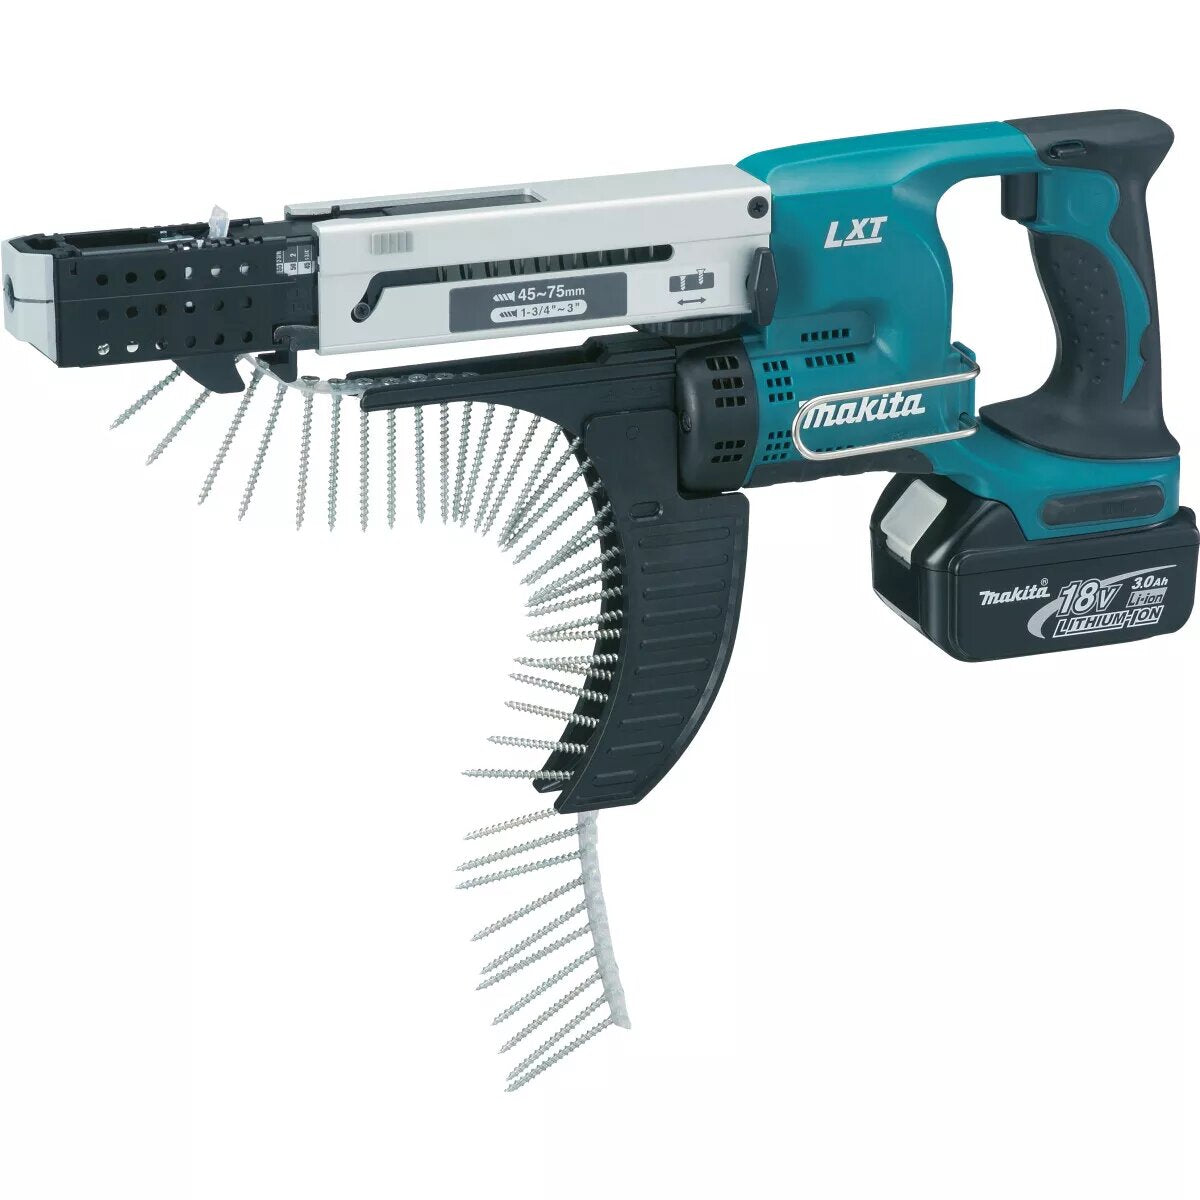 Makita DFR750RTE 18V 45 – 75 mm Auto-Feed Screwdriver With 2 X 5.0Ah Batteries Charger & Case